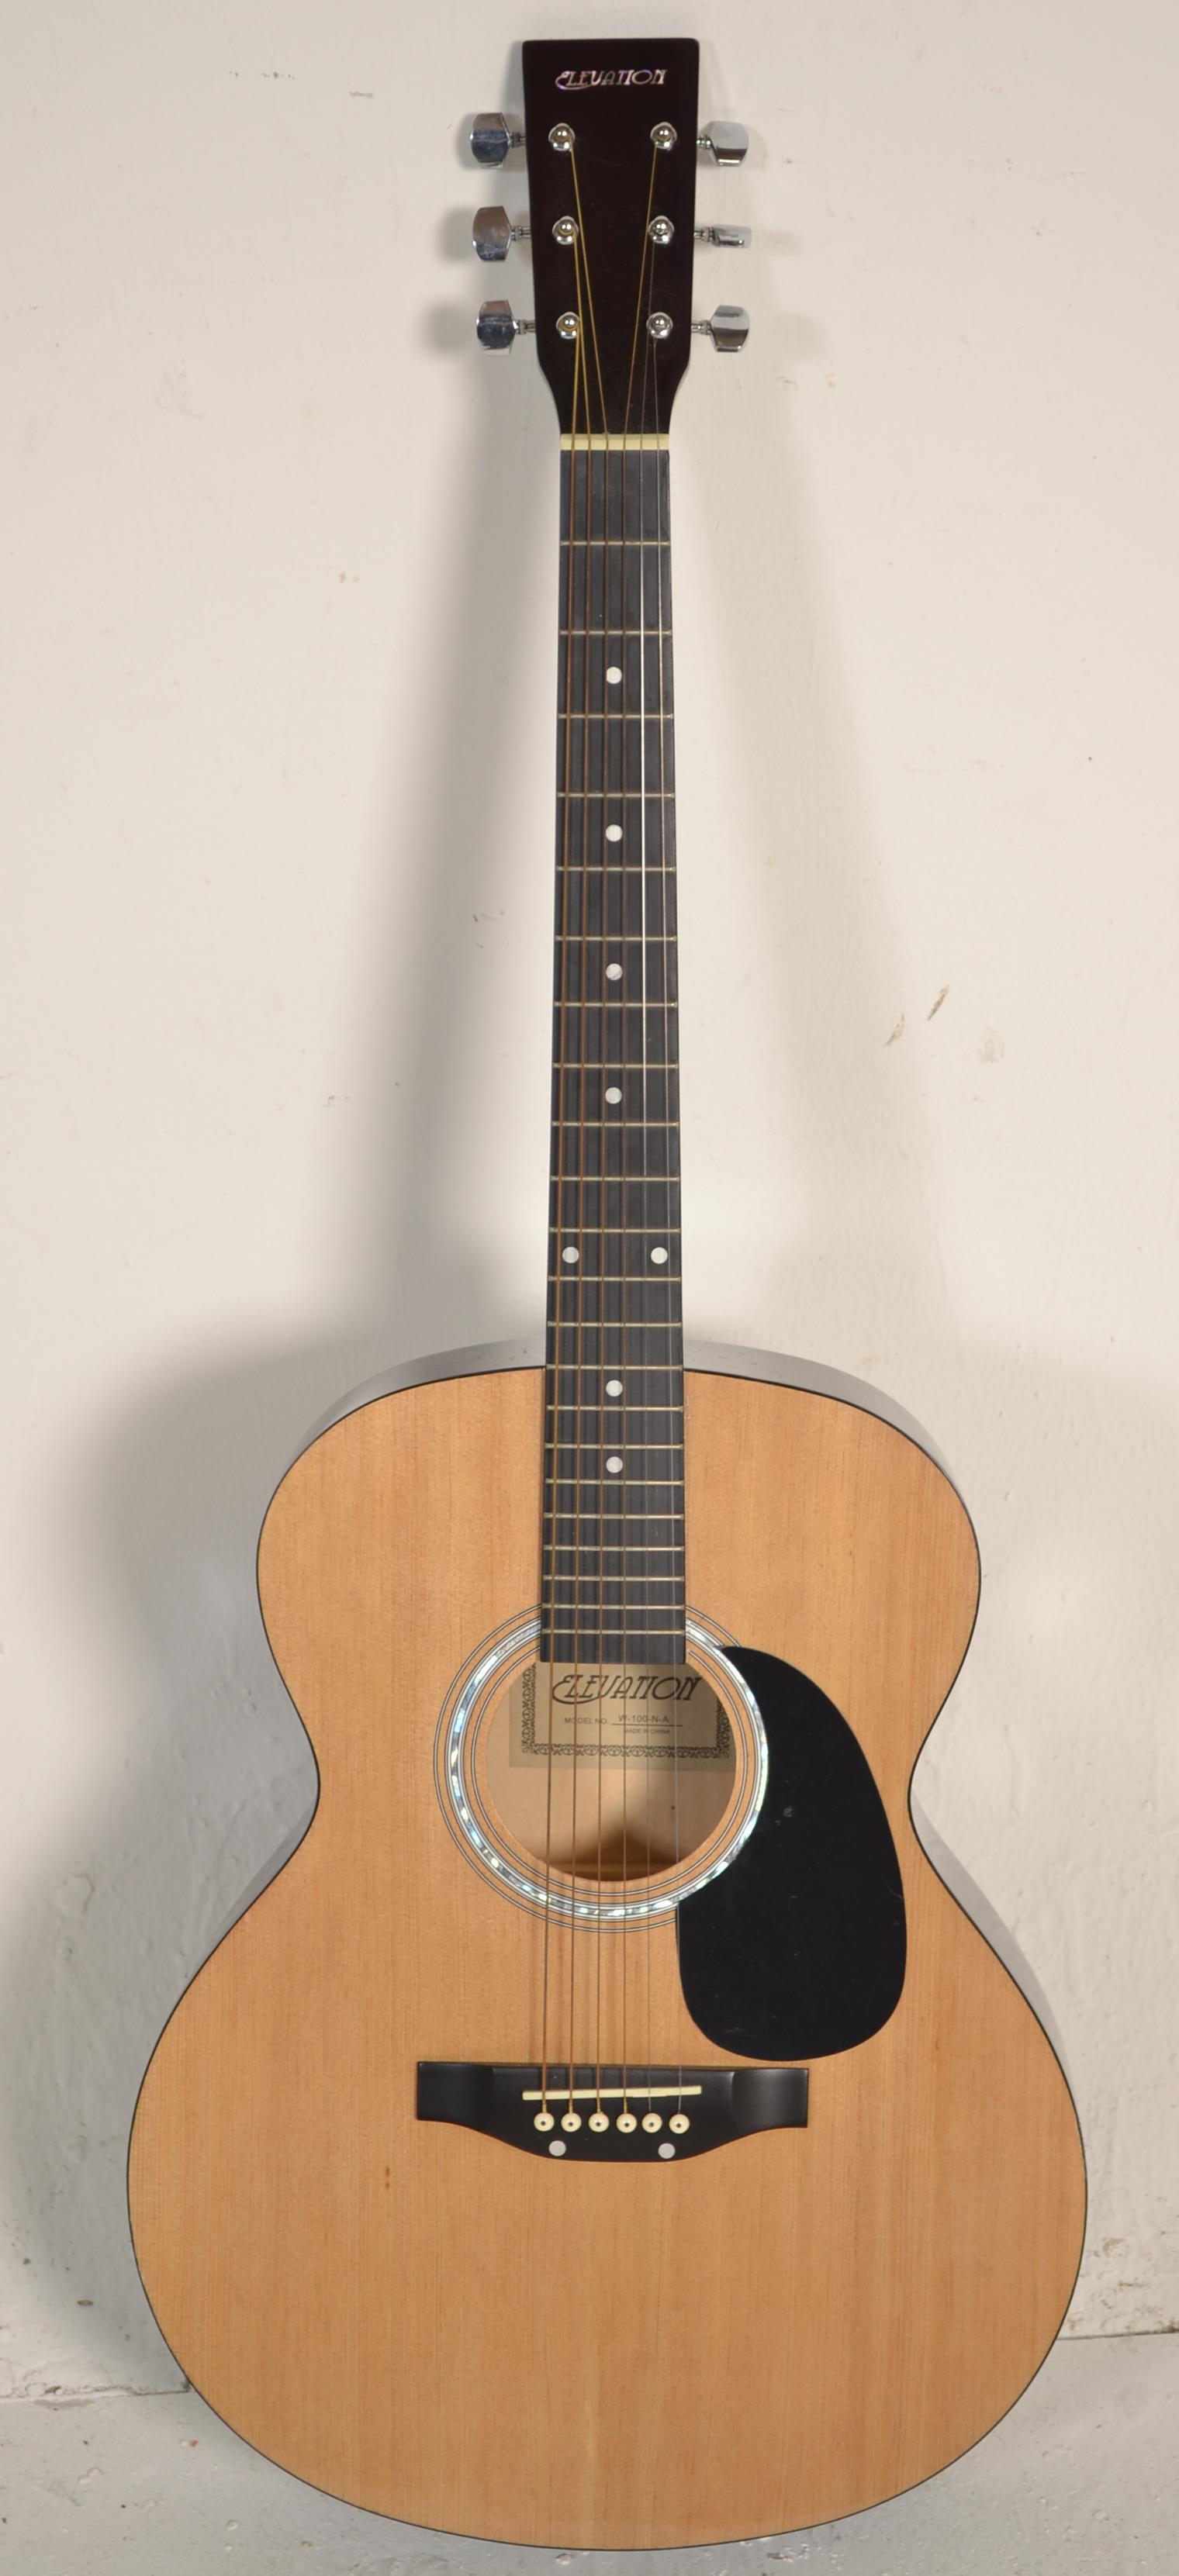 A 20th century ' Elevation ' six string acoustic guitar. Excellent condition, little used.